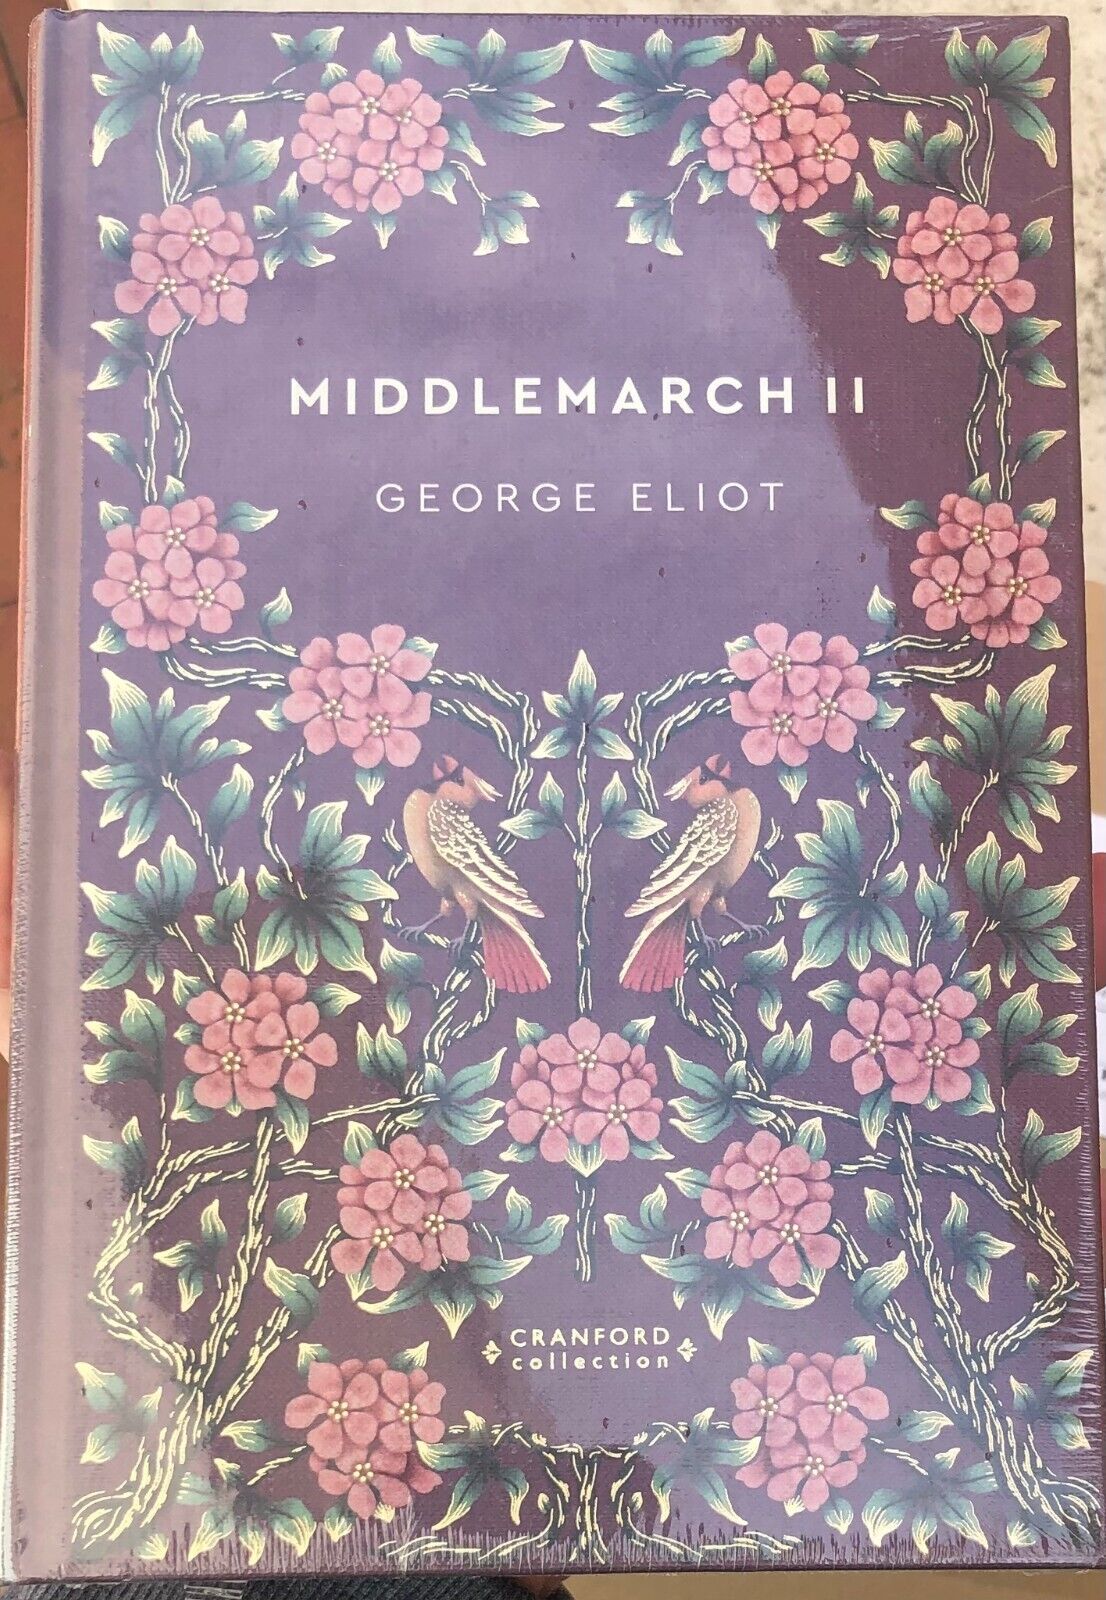  Storie senza tempo n. 38 - Middlemarch II Cranford Collection di George Eliot,